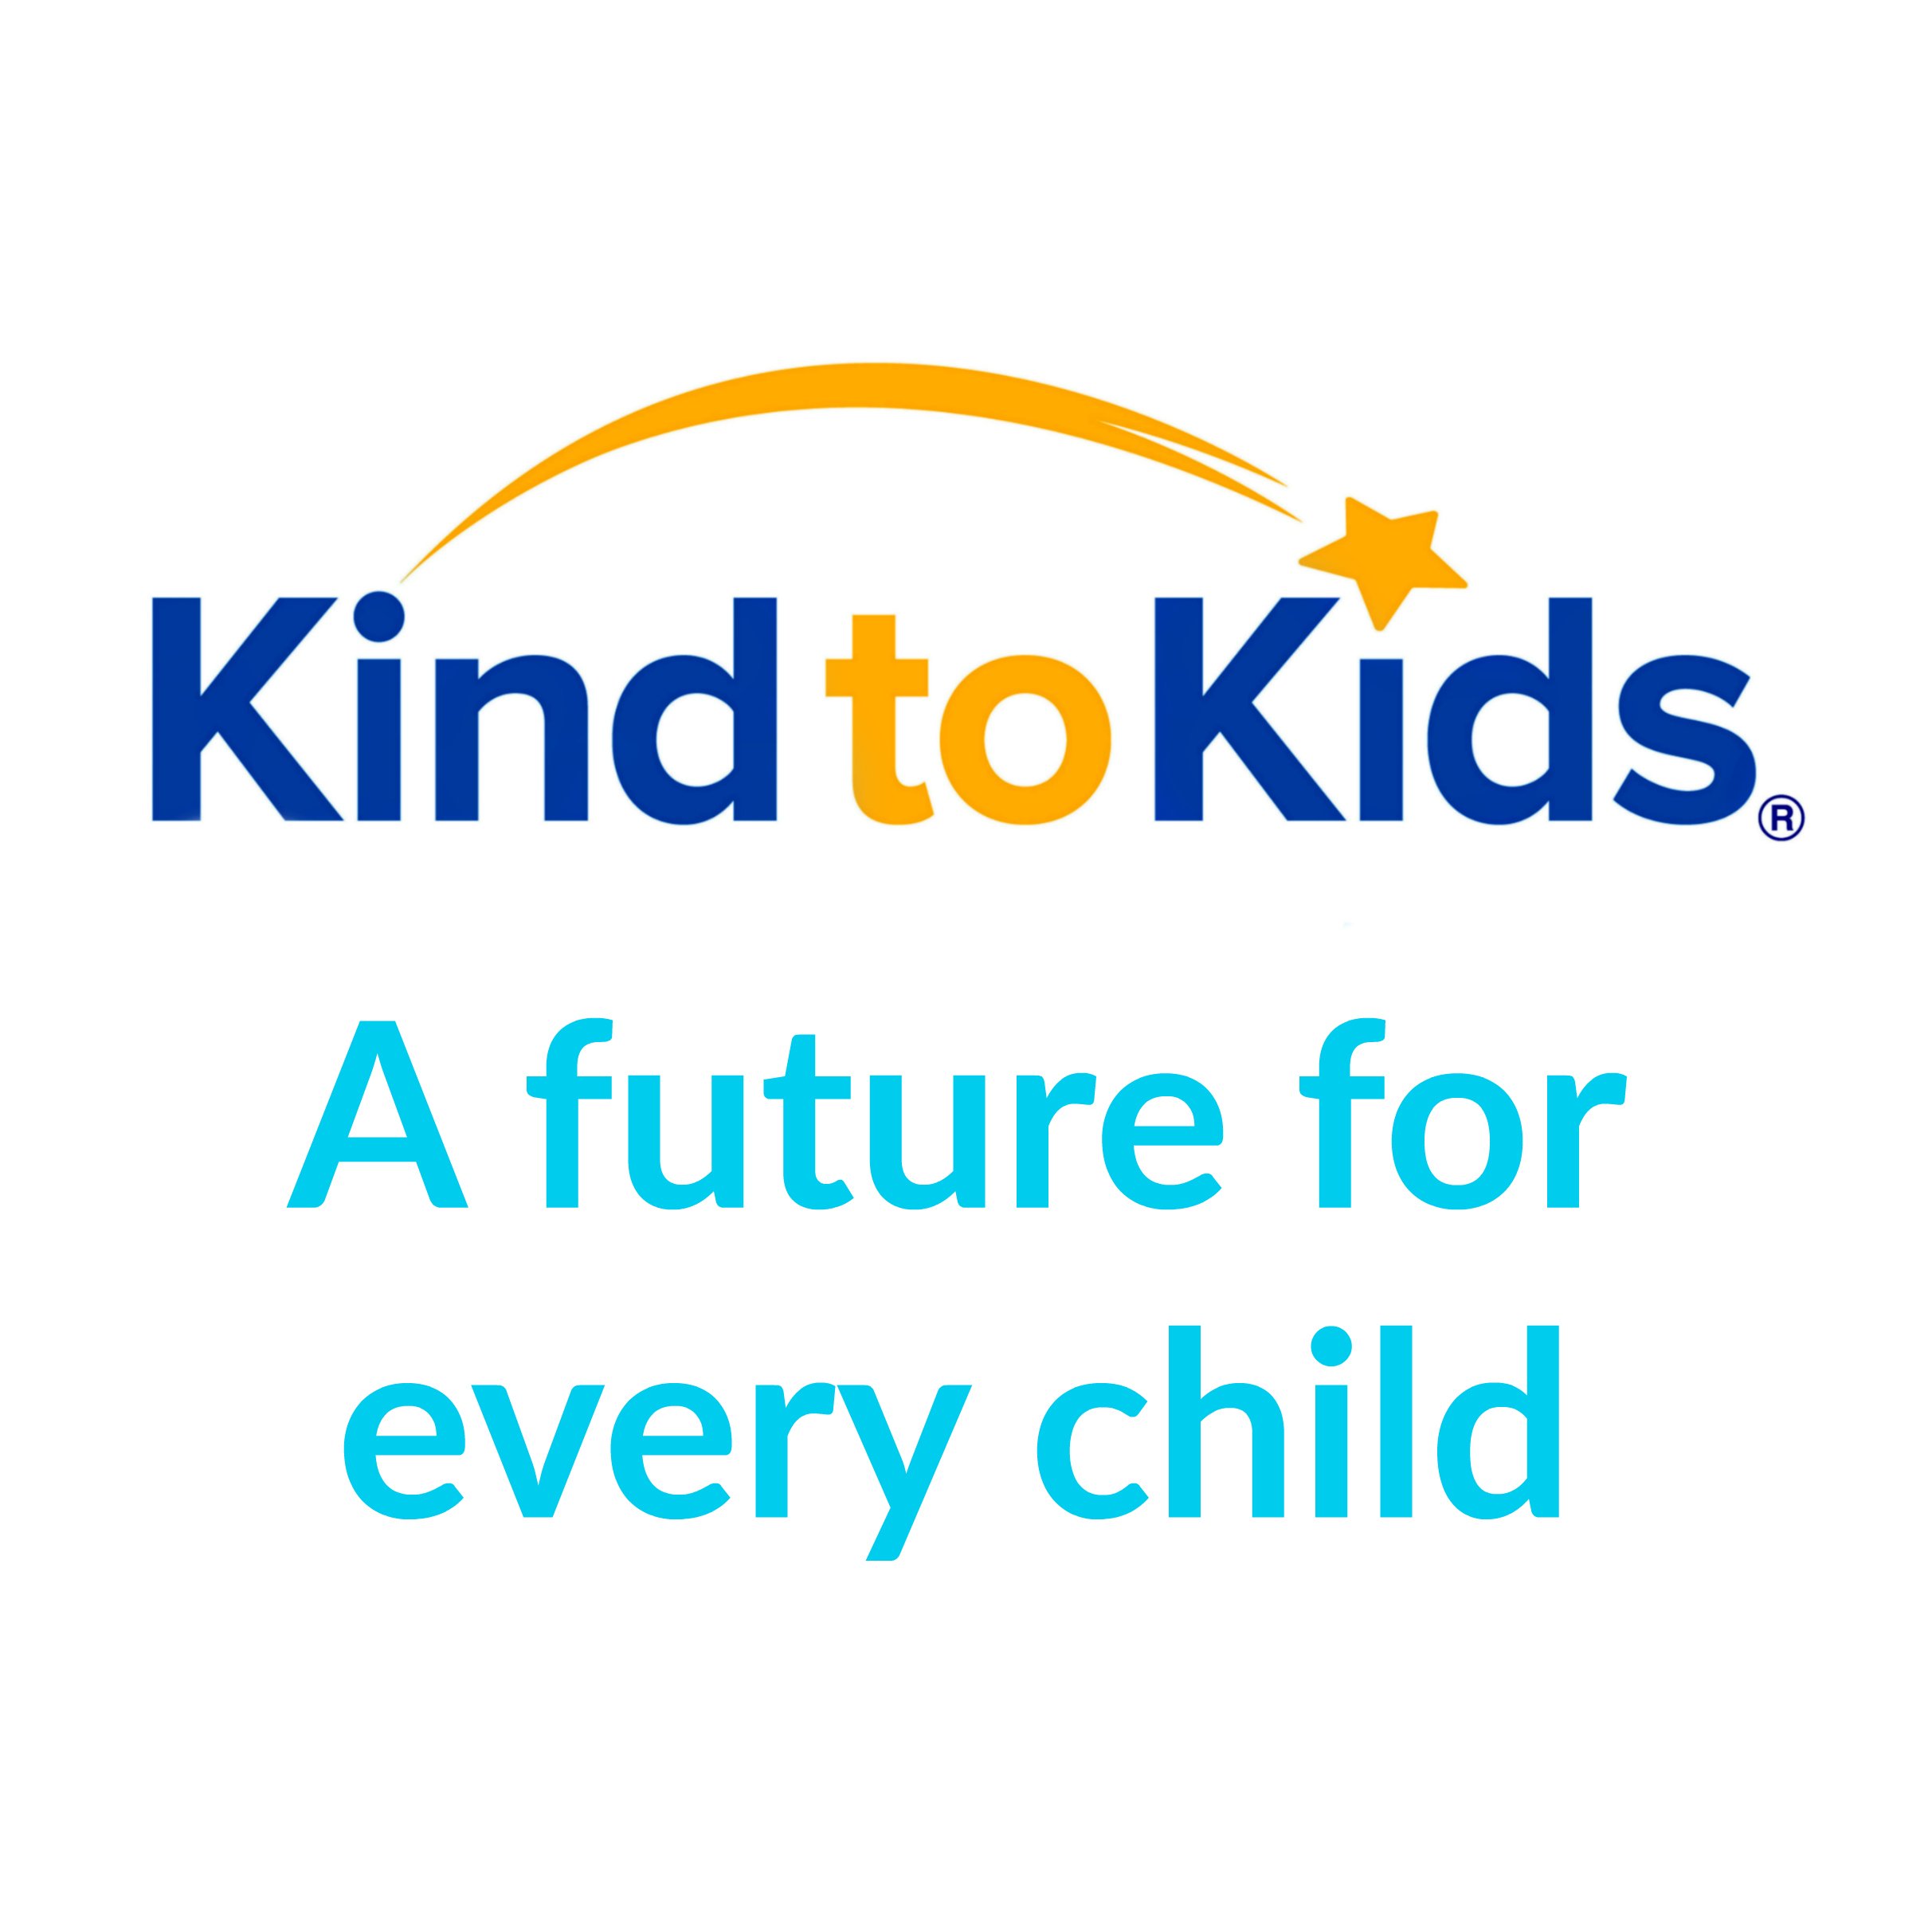 Kind to Kids Foundation is a nonprofit charity helping children who are victims of child abuse, neglect & poverty. We deliver vital education and support.